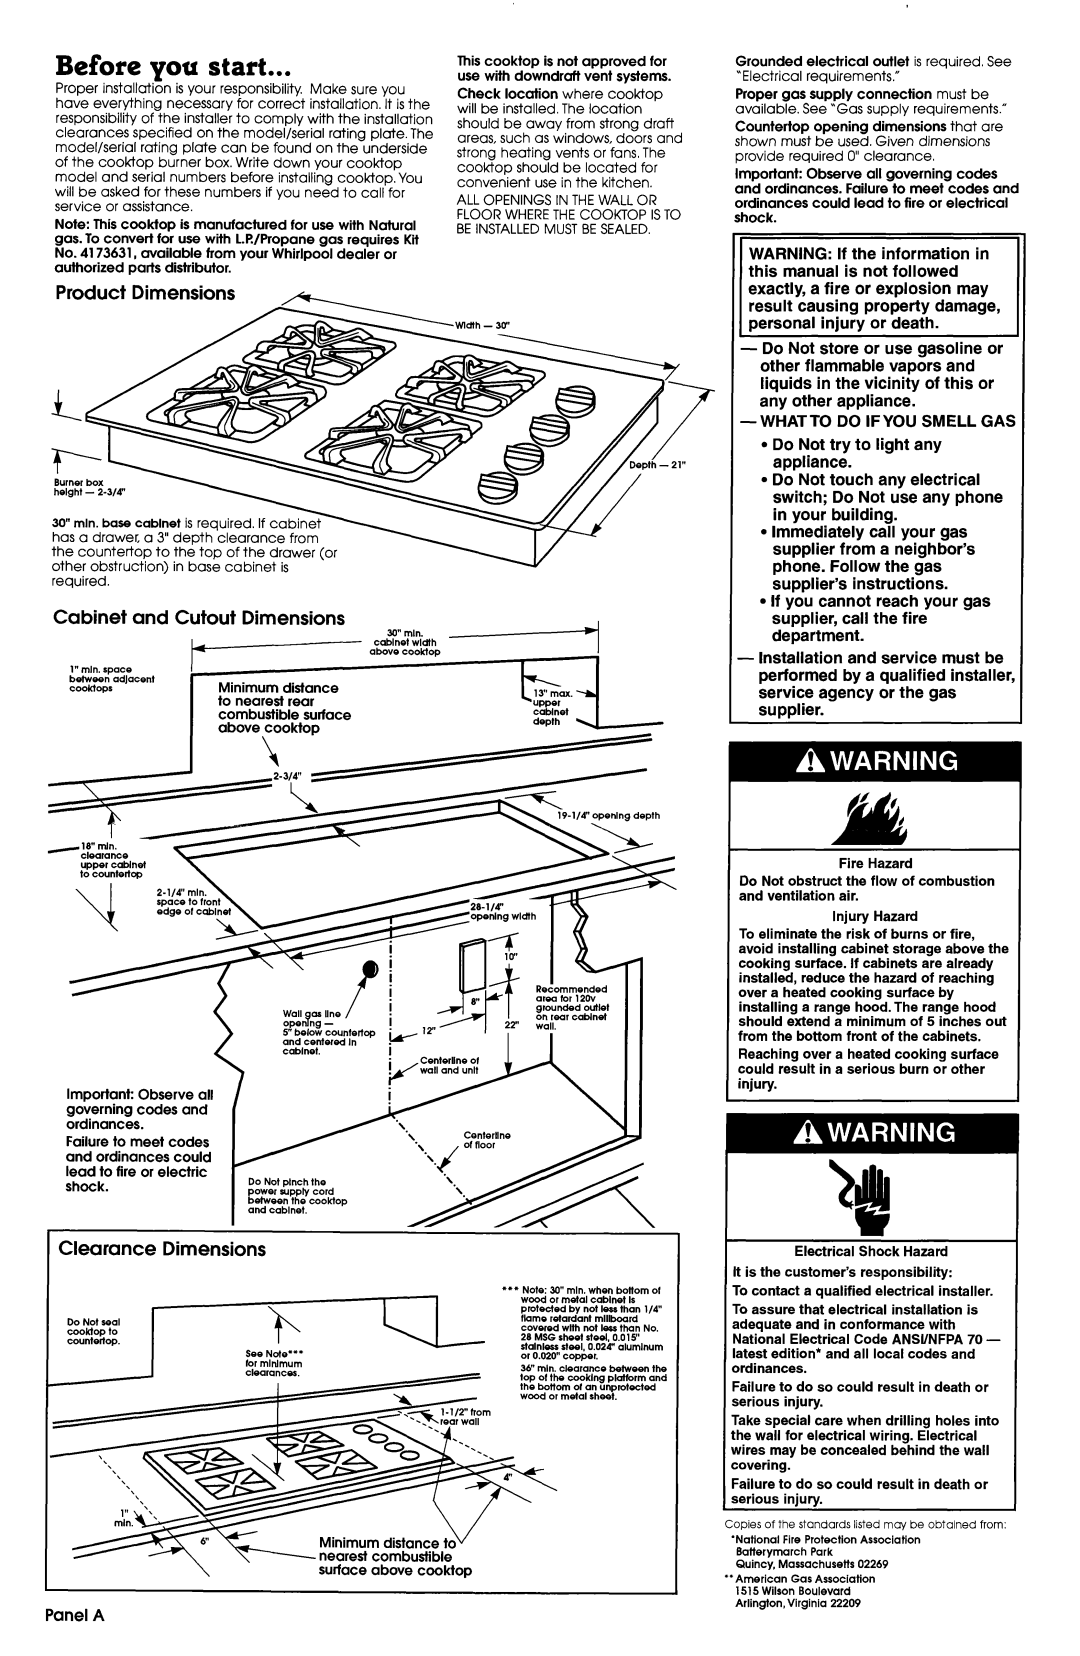 Whirlpool SC864OED installation instructions Before you start, Product Dimensions, Cabinet and Cutout, Clearance 